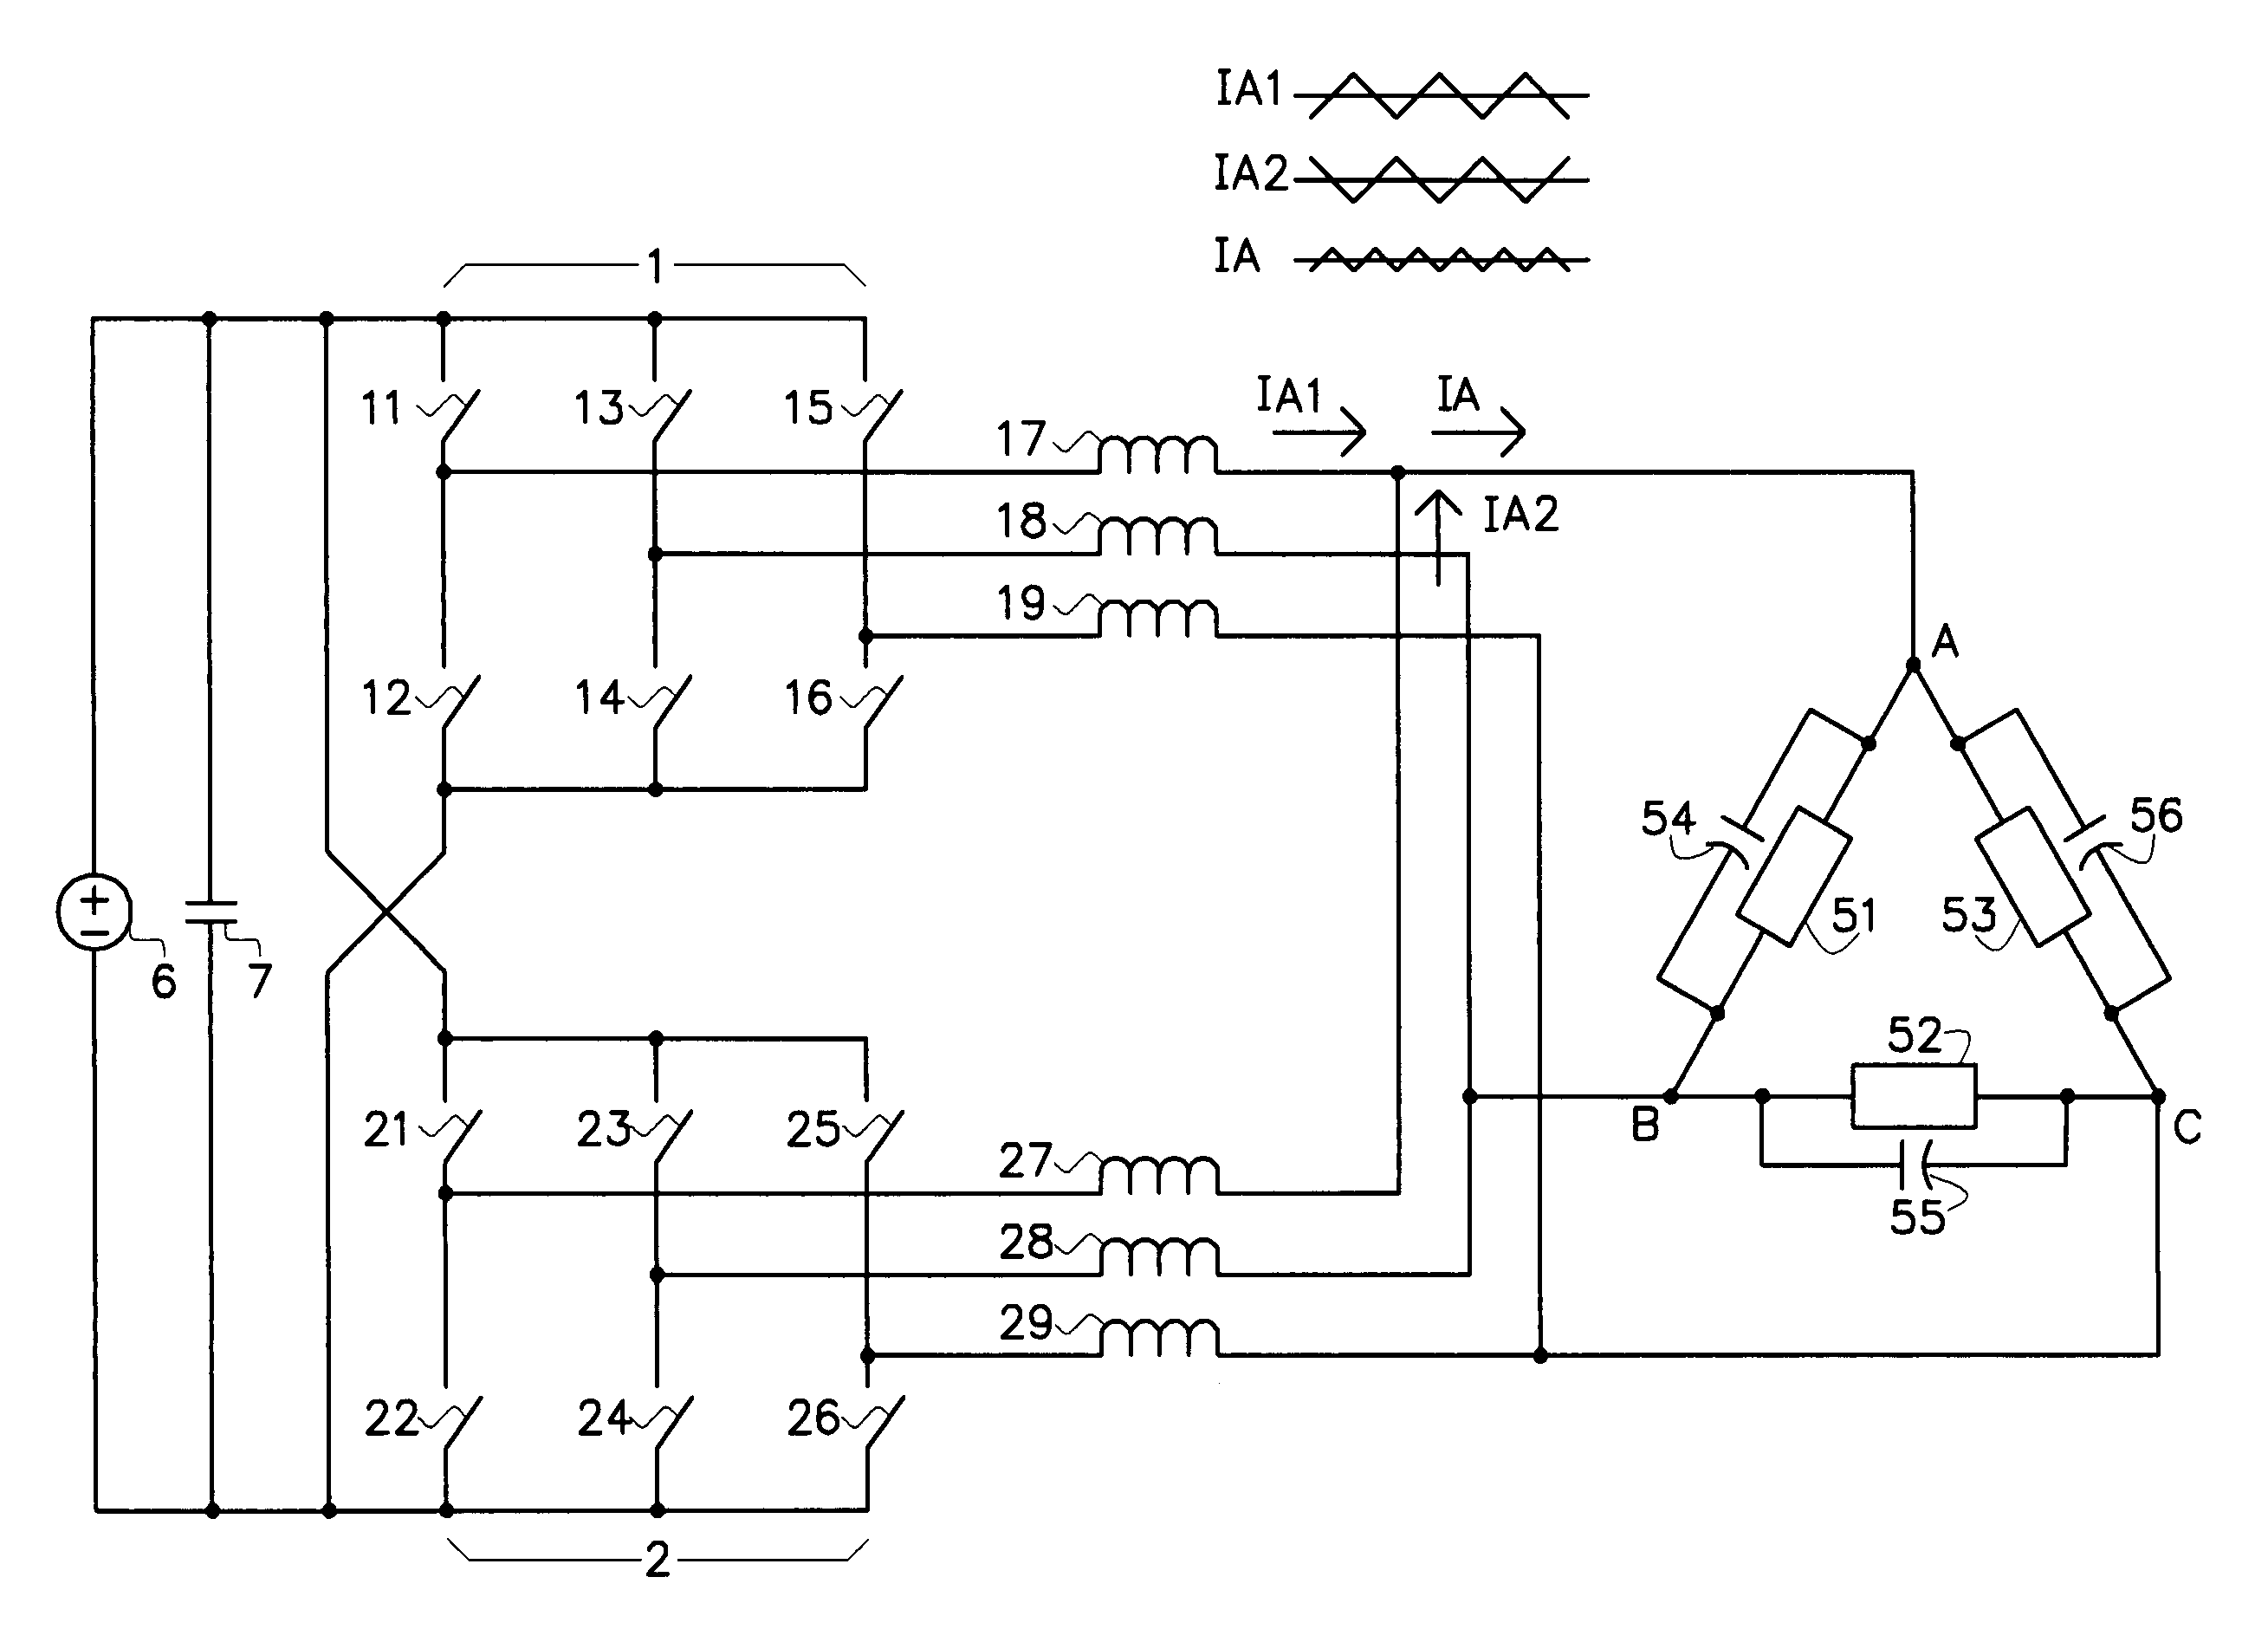 Power converter with ripple current cancellation using skewed switching techniques